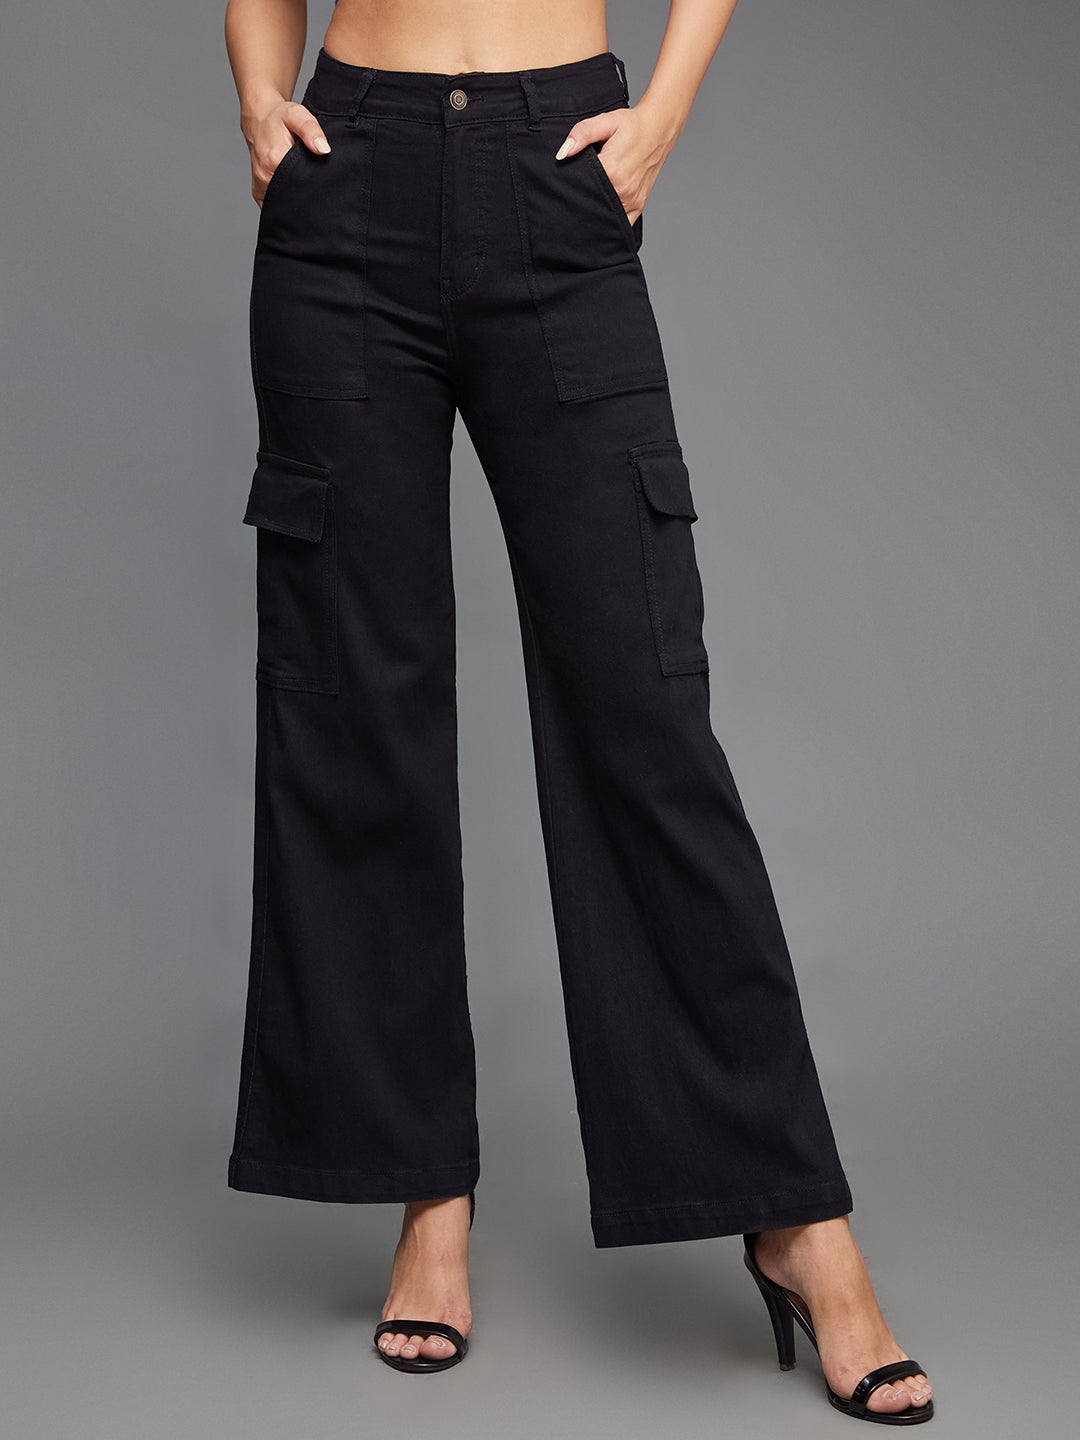 MISS CHASE | Black Wide-Leg High-Rise Clean-Look Regular-Length Stretchable Denim Cargo Jeans